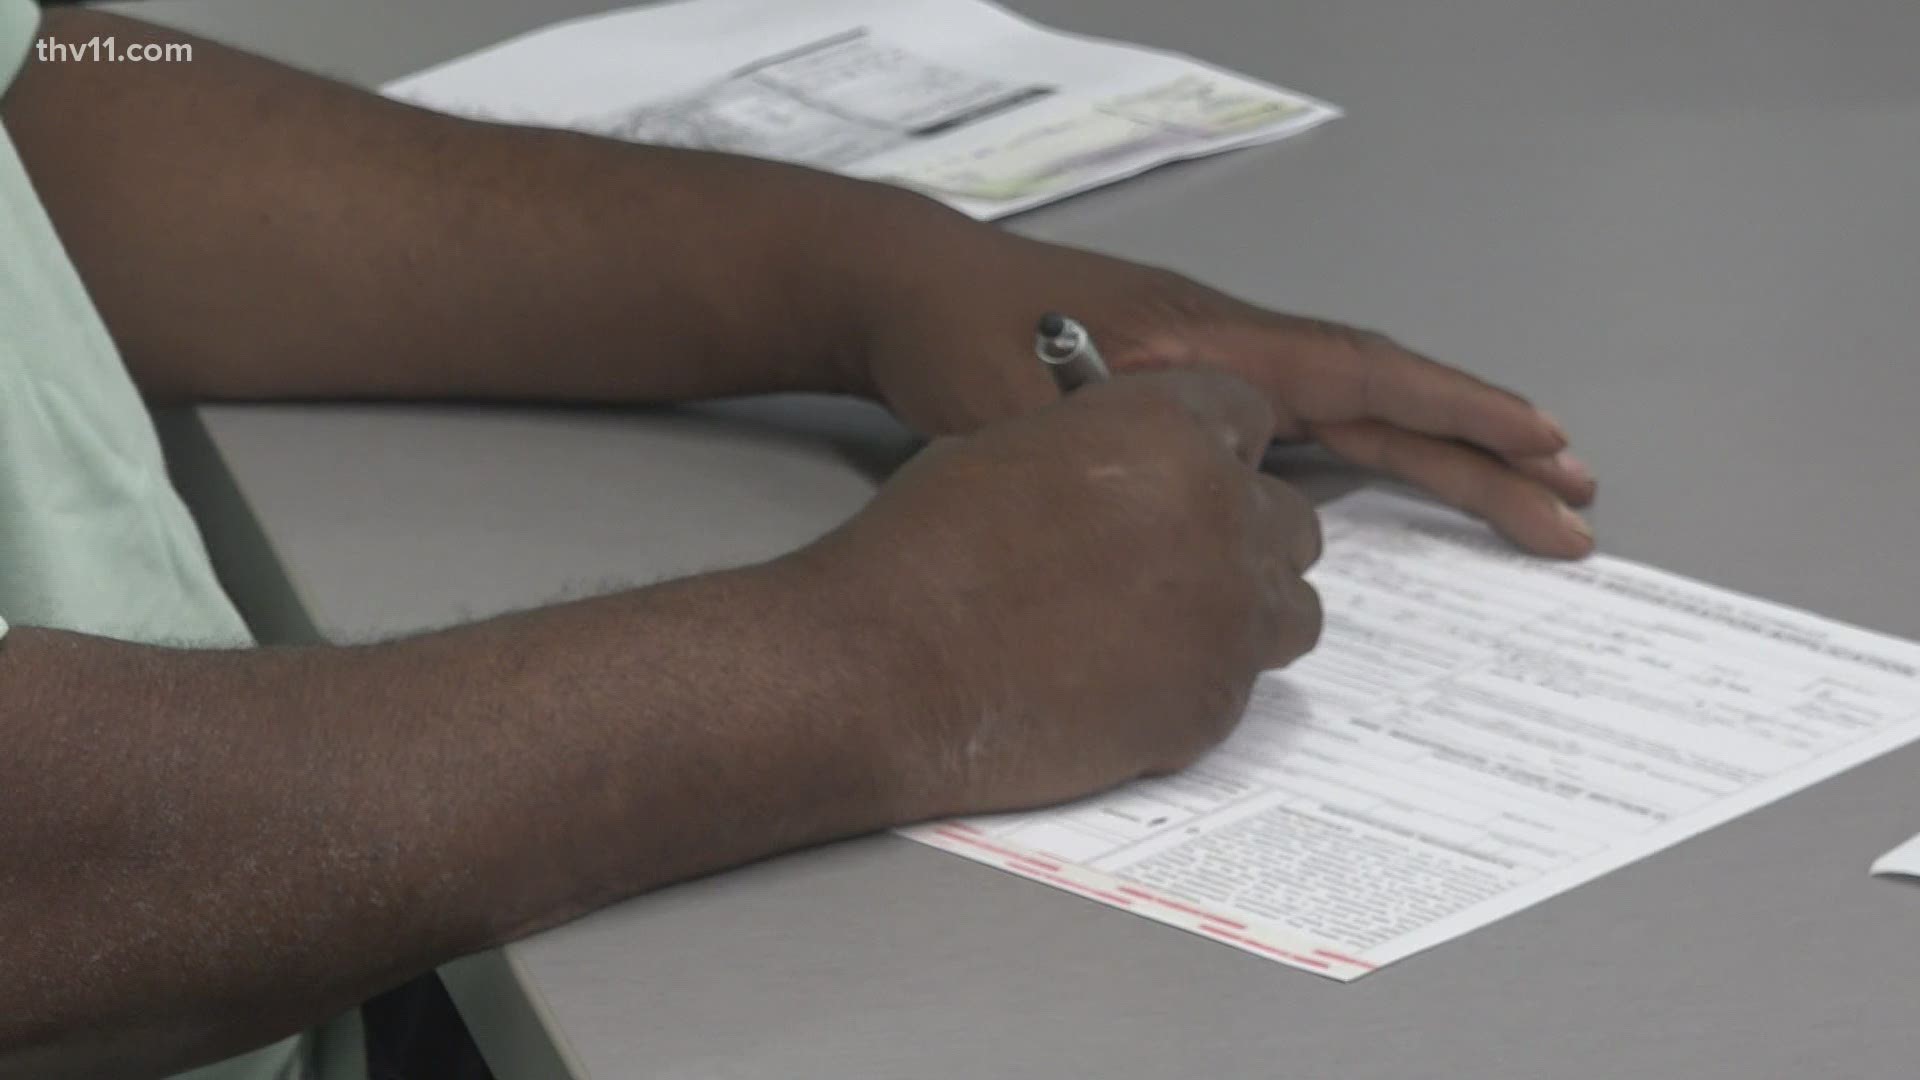 Some 12,000 more voters have registered in Pulaski County this year than in the 2016 election, and the county clerk is says many of them are younger and minorities.